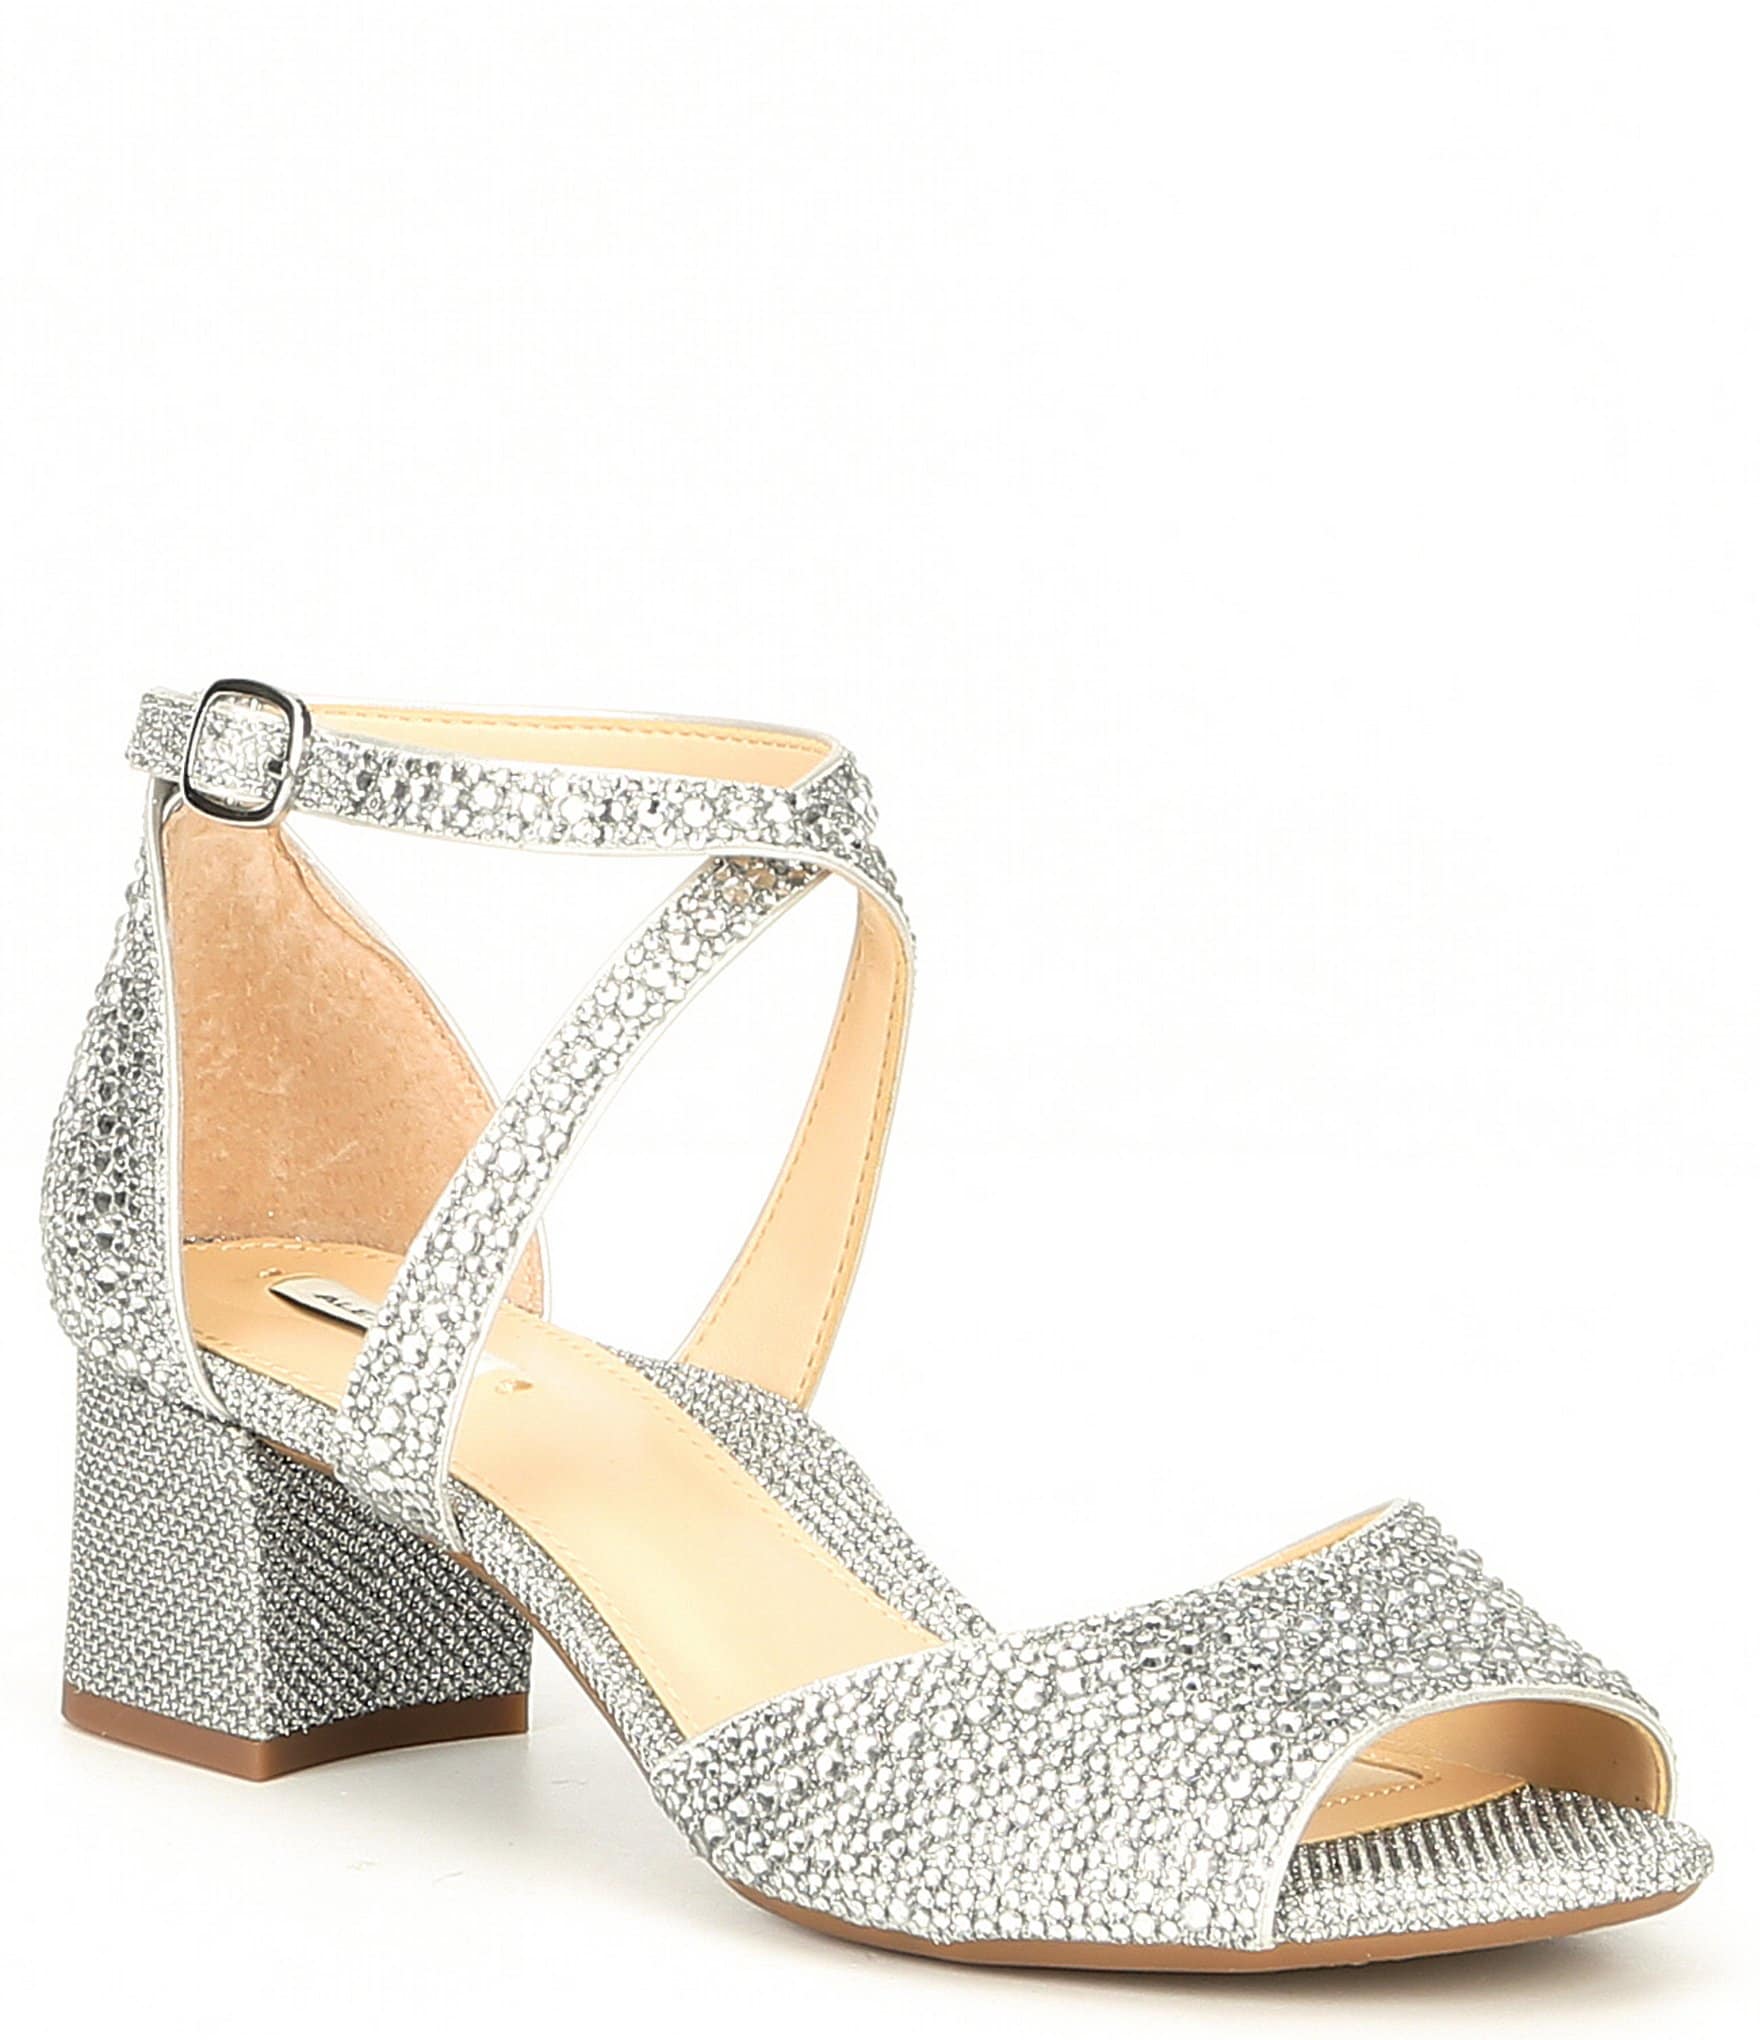 SILVER METALLIC PEEP TOE LOW HEELED BLOCK HEELS ANKLE STRAP STRAPPY SANDALS SIZE 